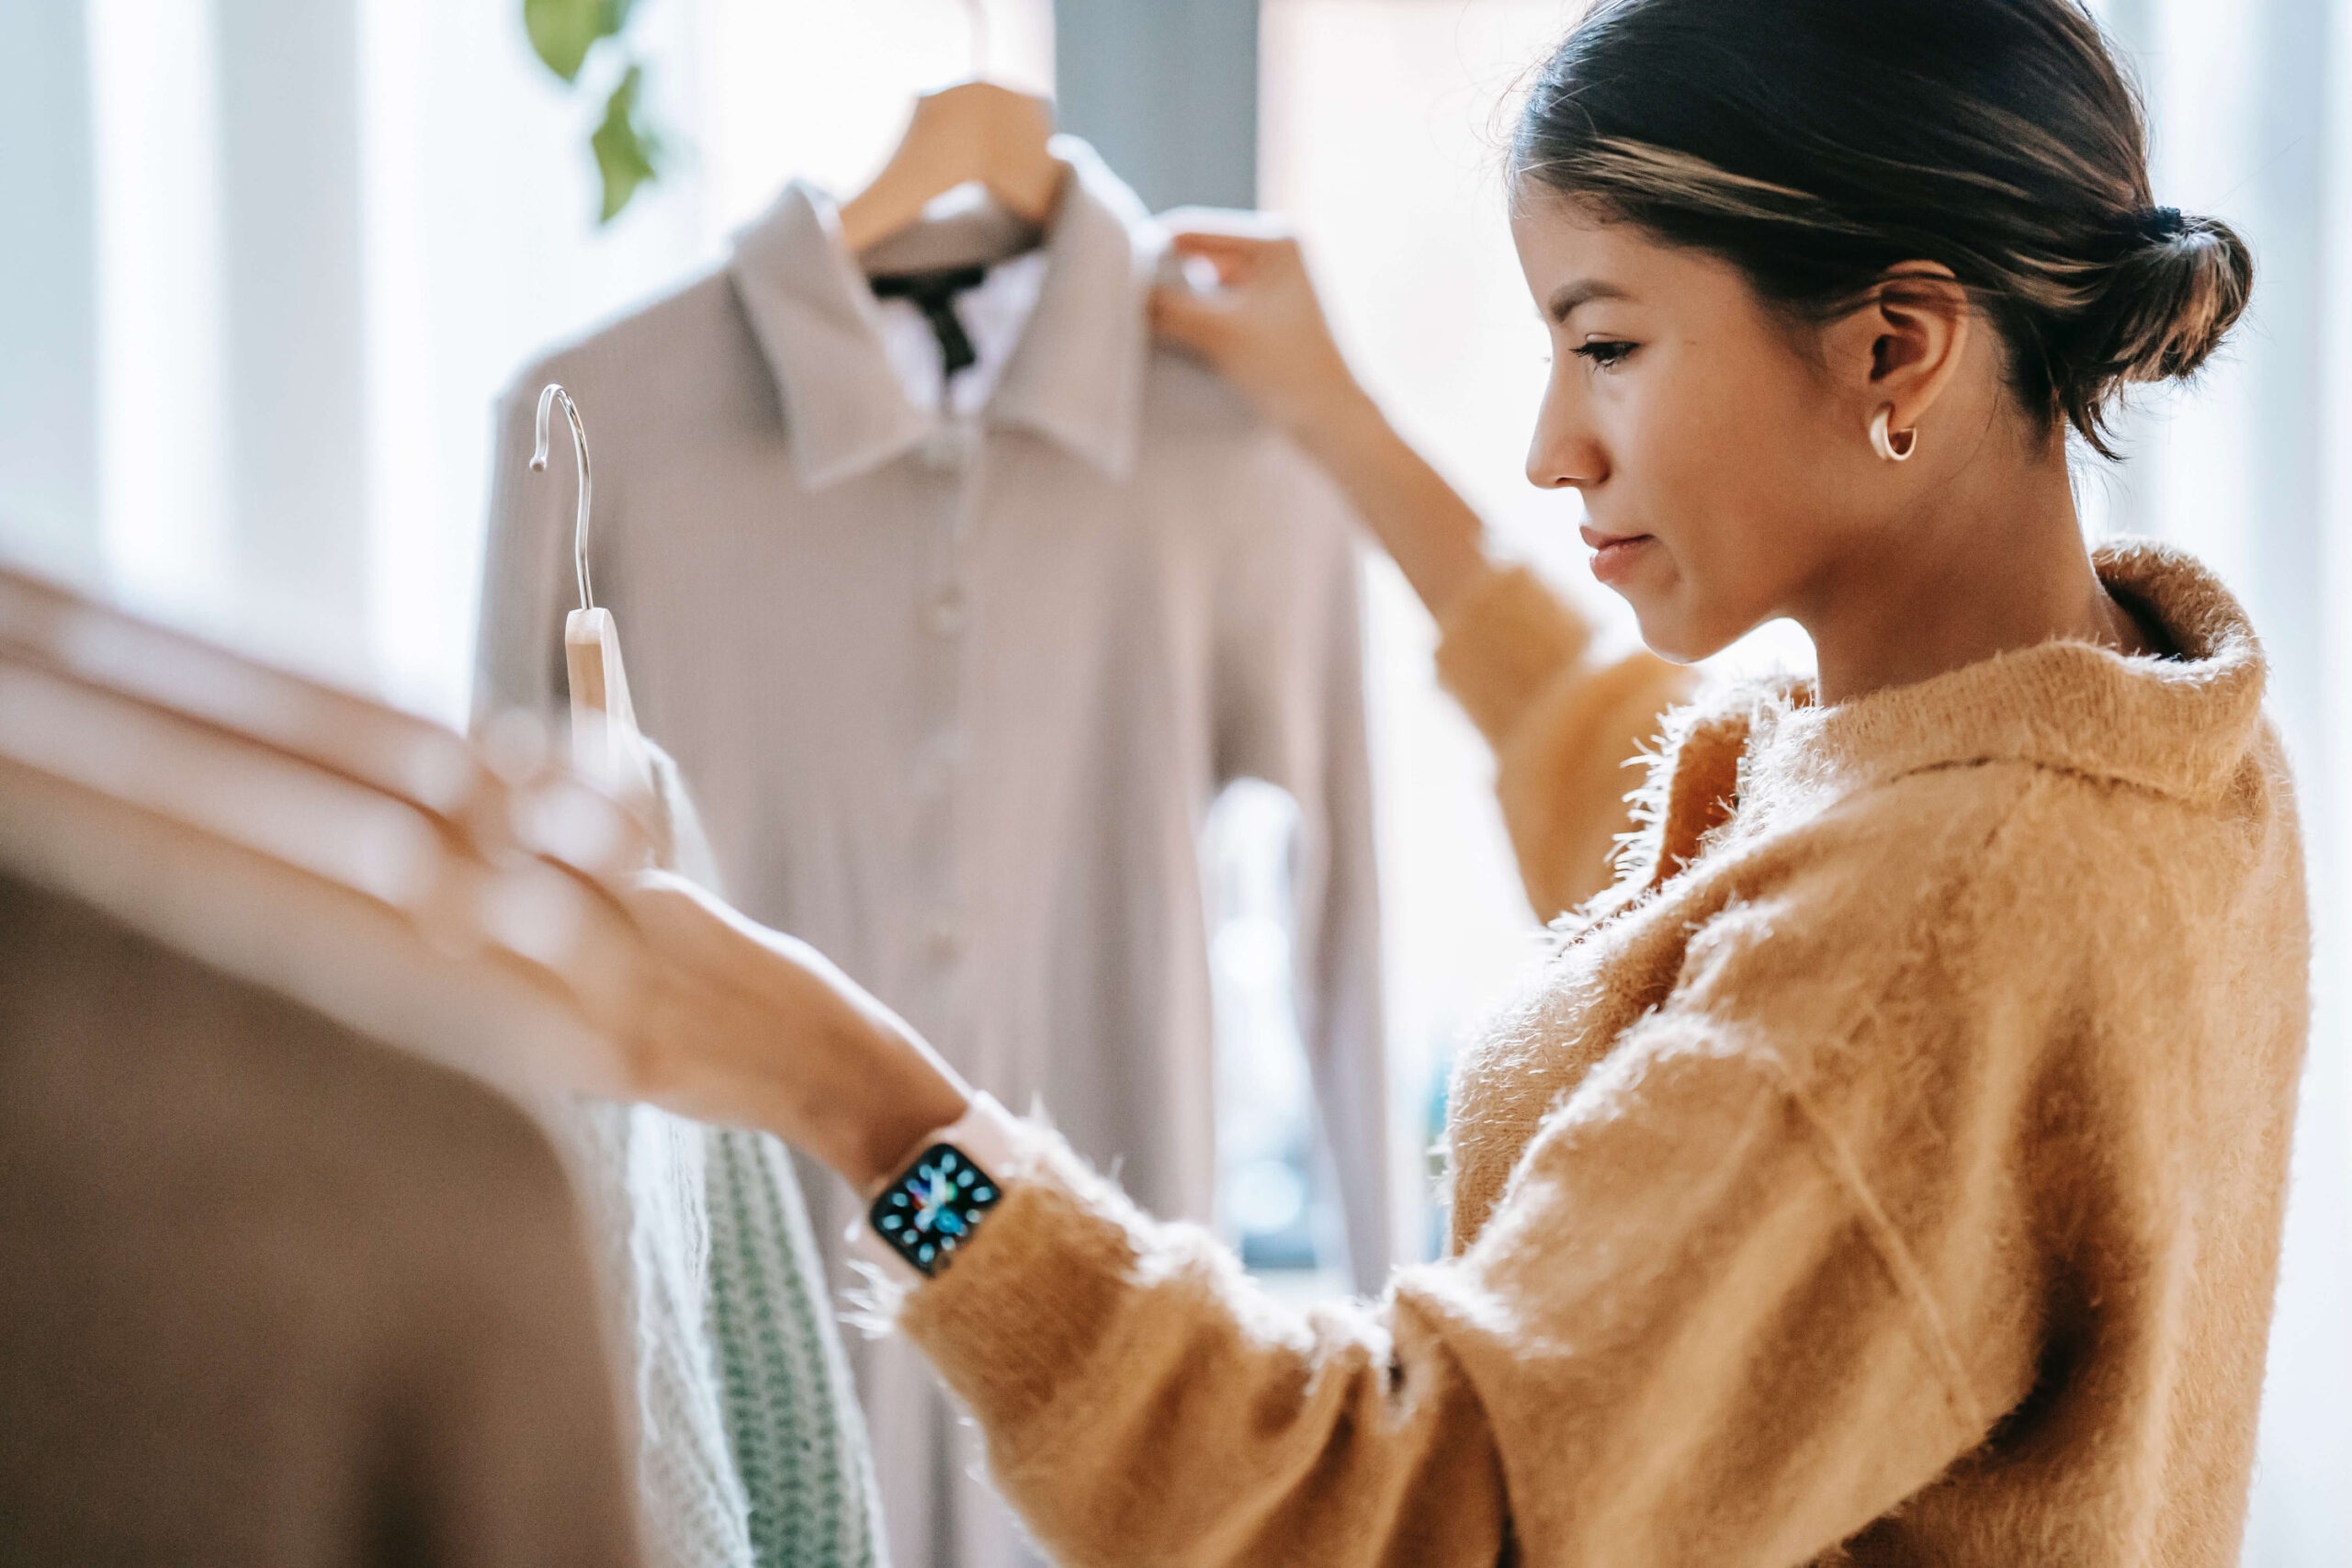 4 Ways Technology Boosts The Retail Experience (And Retail PR)